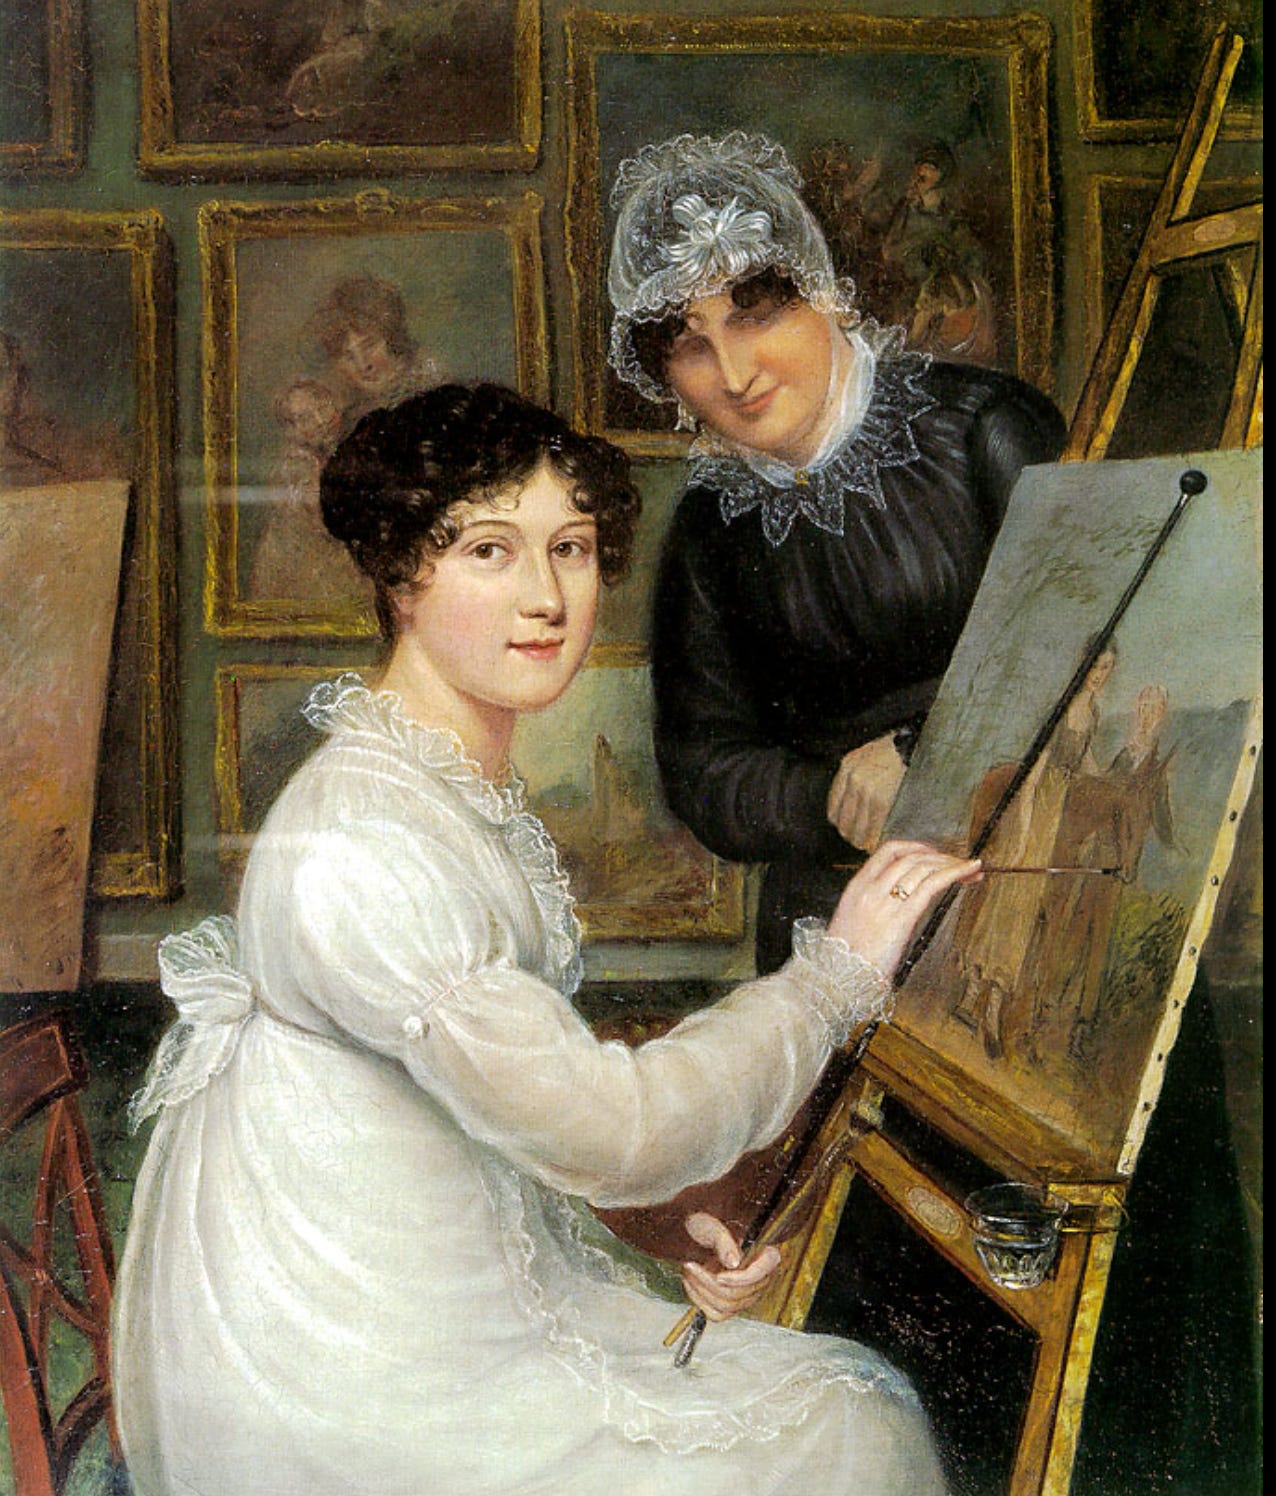 Self-portrait of a 19th century artist, Rolinda Sharples, depicts the artist at work paintaing amidst a background of paintings, as her mother looks on in satisfaction. The artist's expression is serene as she looks at the viewer, a paintbrush poised in her hand. 